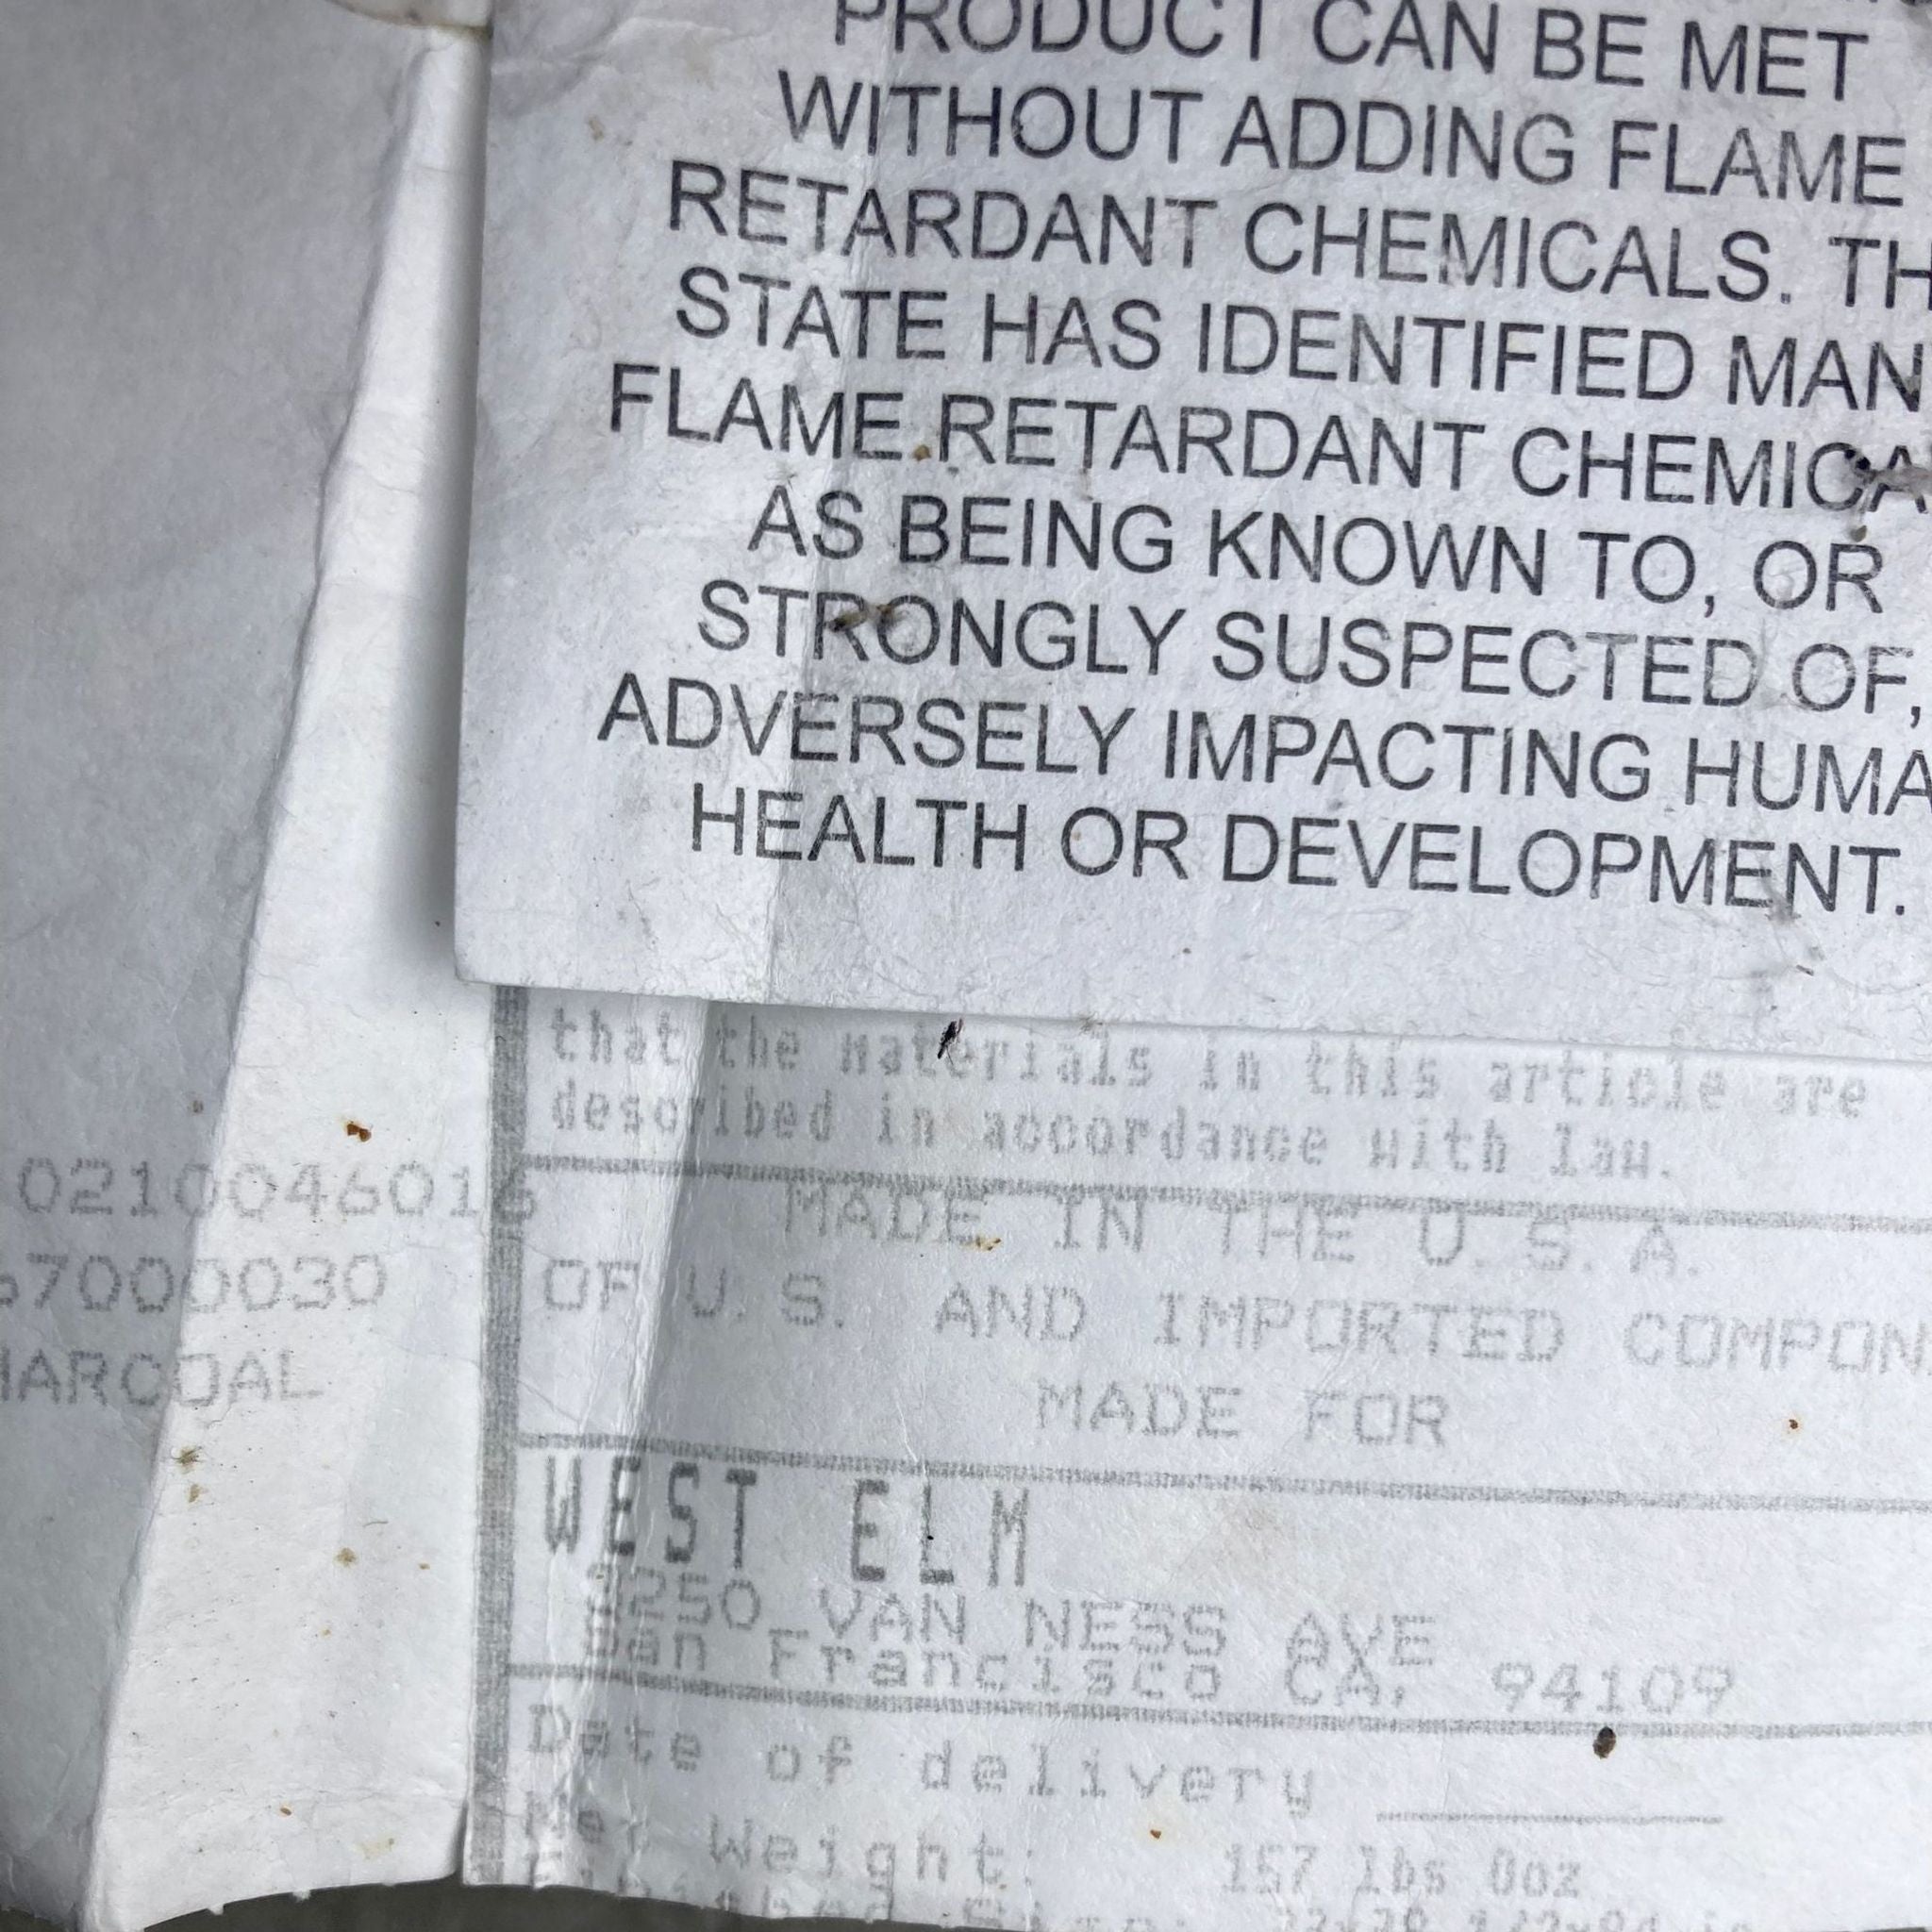 Torn and wrinkled label with text discussing flame retardant chemicals, indicating the item is from West Elm.